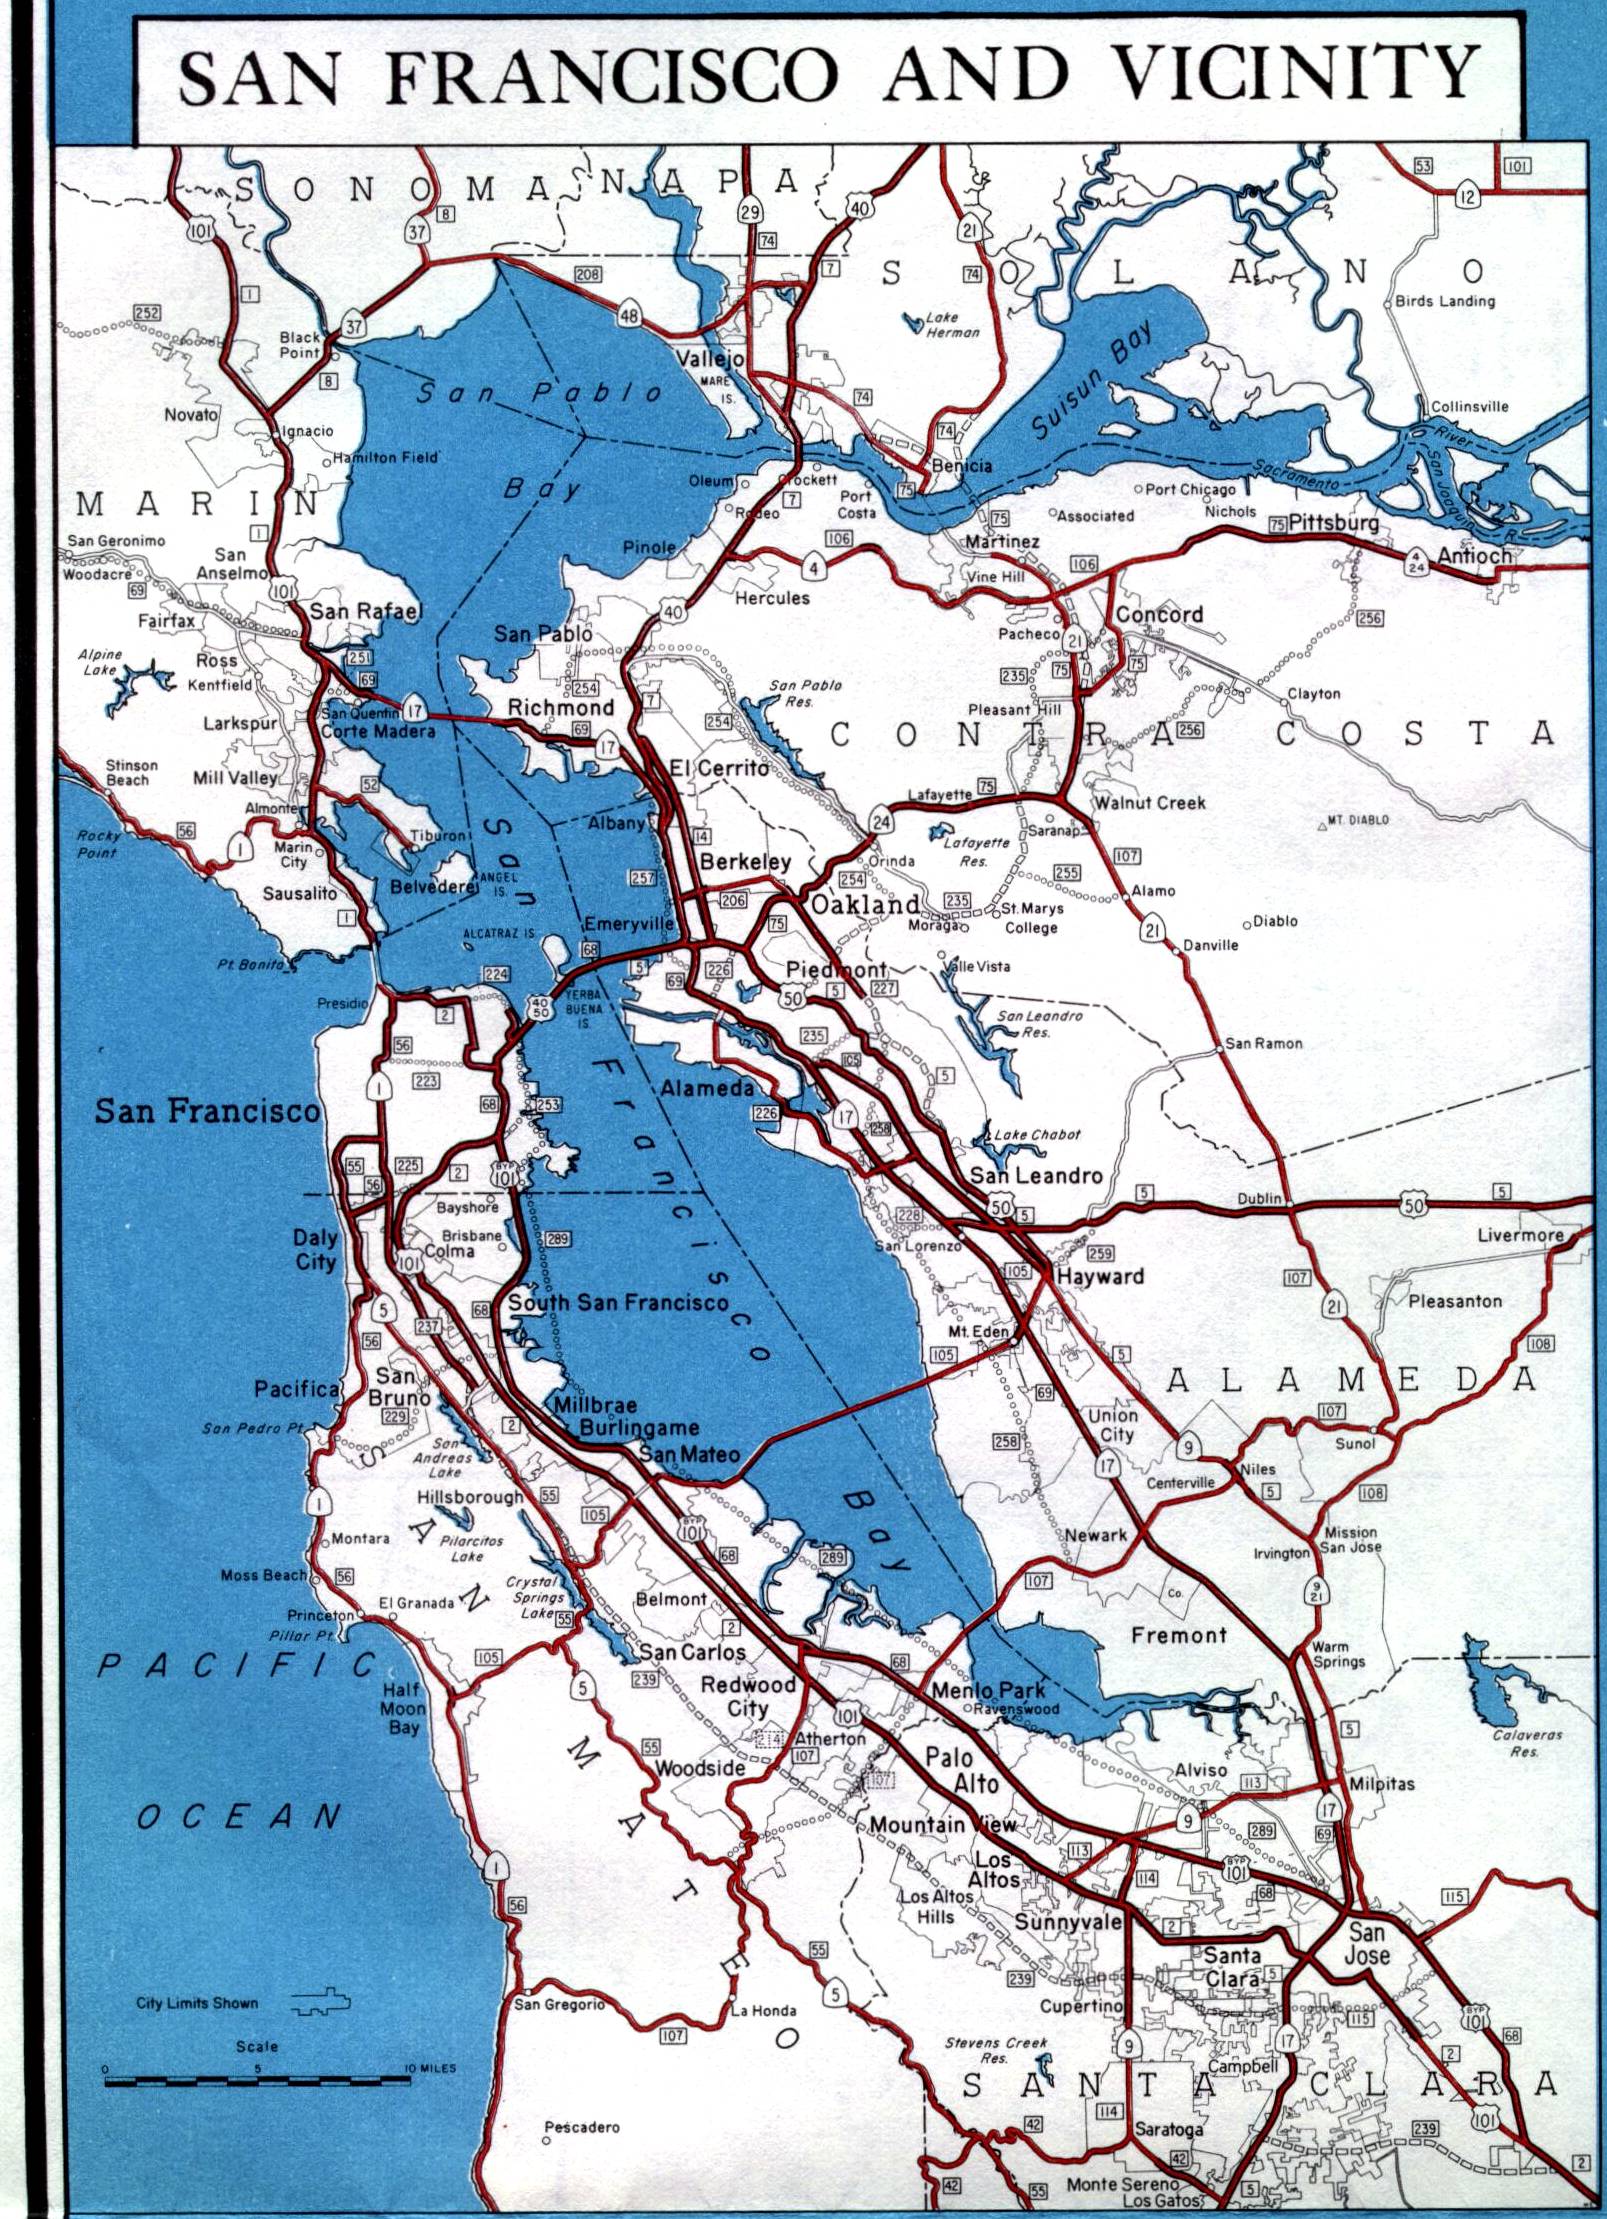 San Francisco and vicinity on the 1961 California official highway map